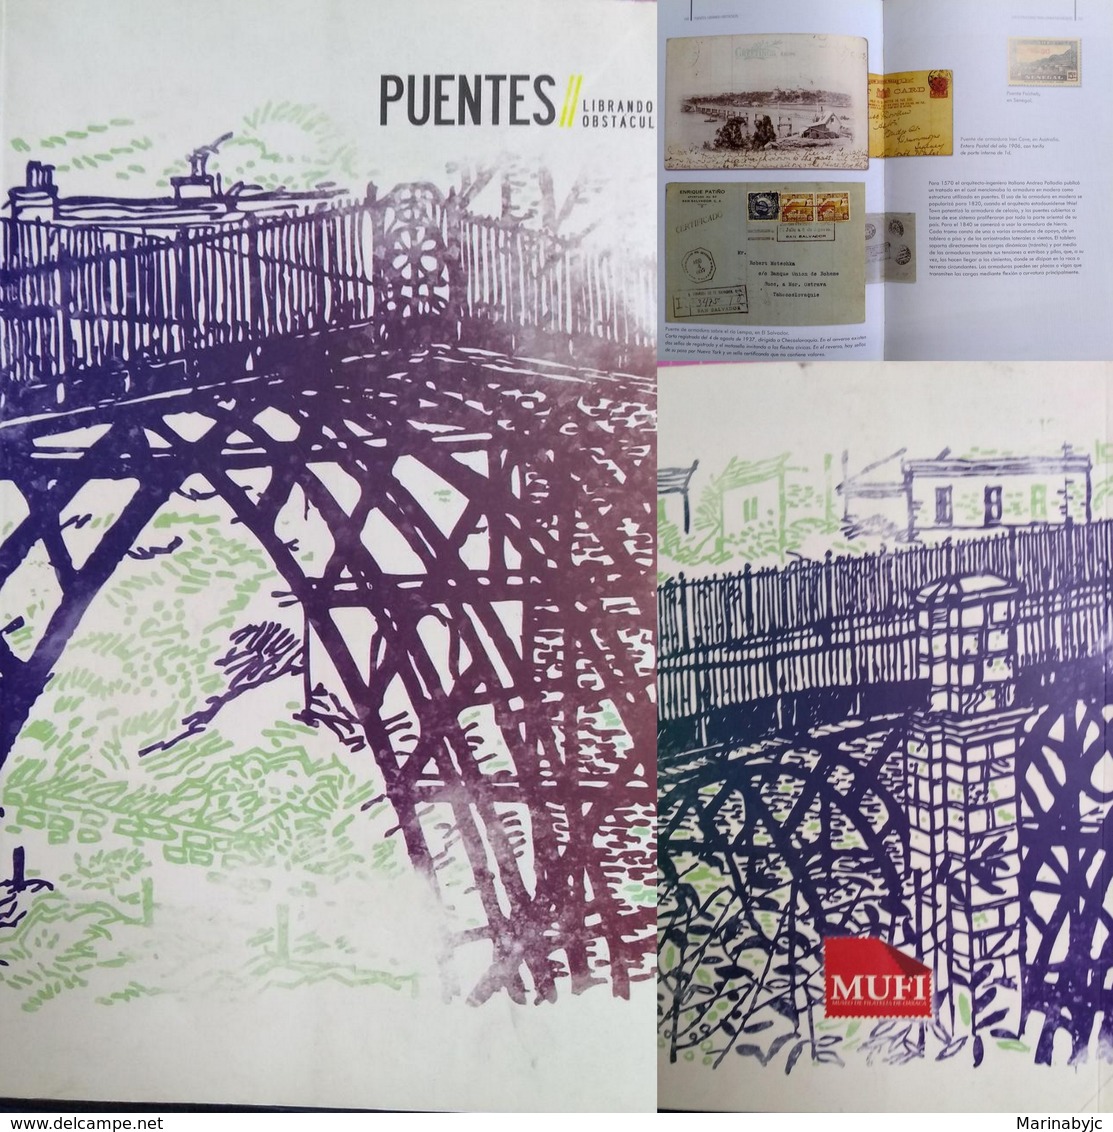 J) 2009 MEXICO, BOOK OF BRIDGES, COLOR FULL, VERSION IN SPANISH, 293 PAGES, XF - Mexiko